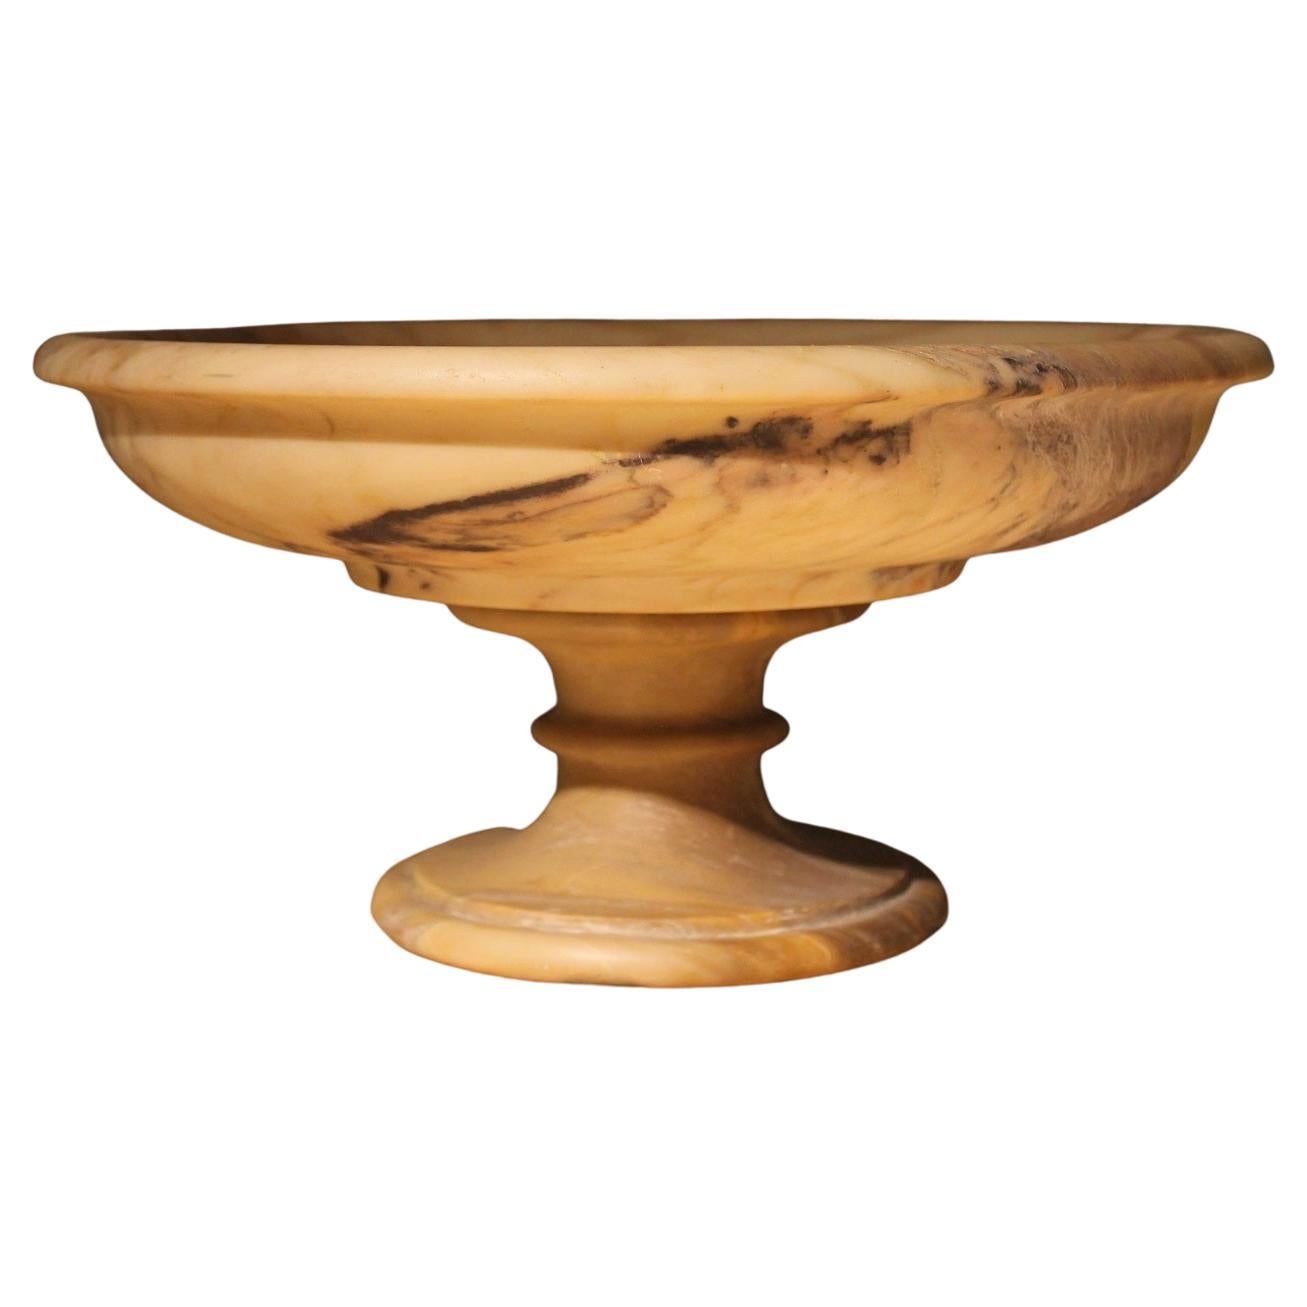 Italian 19th Century Neoclassical Marble Bowl on Pedestal or Tazza Centerpiece 